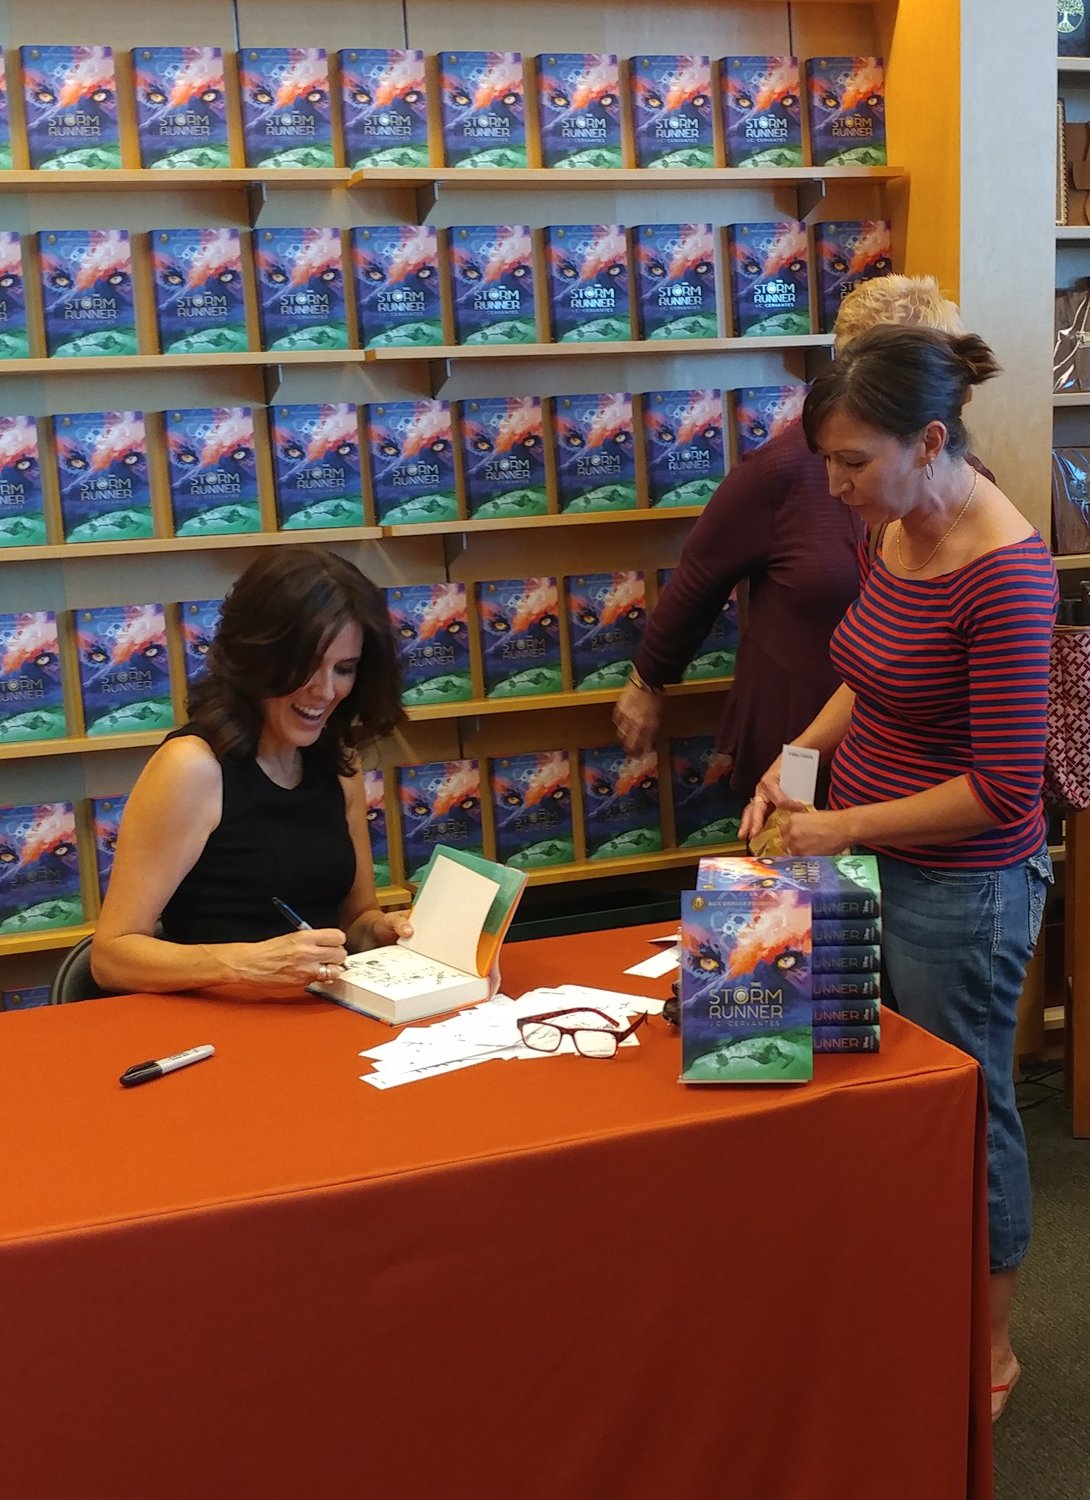 It was standing room only when Jennifer Cervantes signed copies of “Storm Runner” at Barnes & Noble Bookstore at Mesilla Valley Mall in September 2018. She will sign copies of her latest book, “Flirting with Fate,” at 3 p.m. Saturday, April 23, at the same Barnes & Noble.